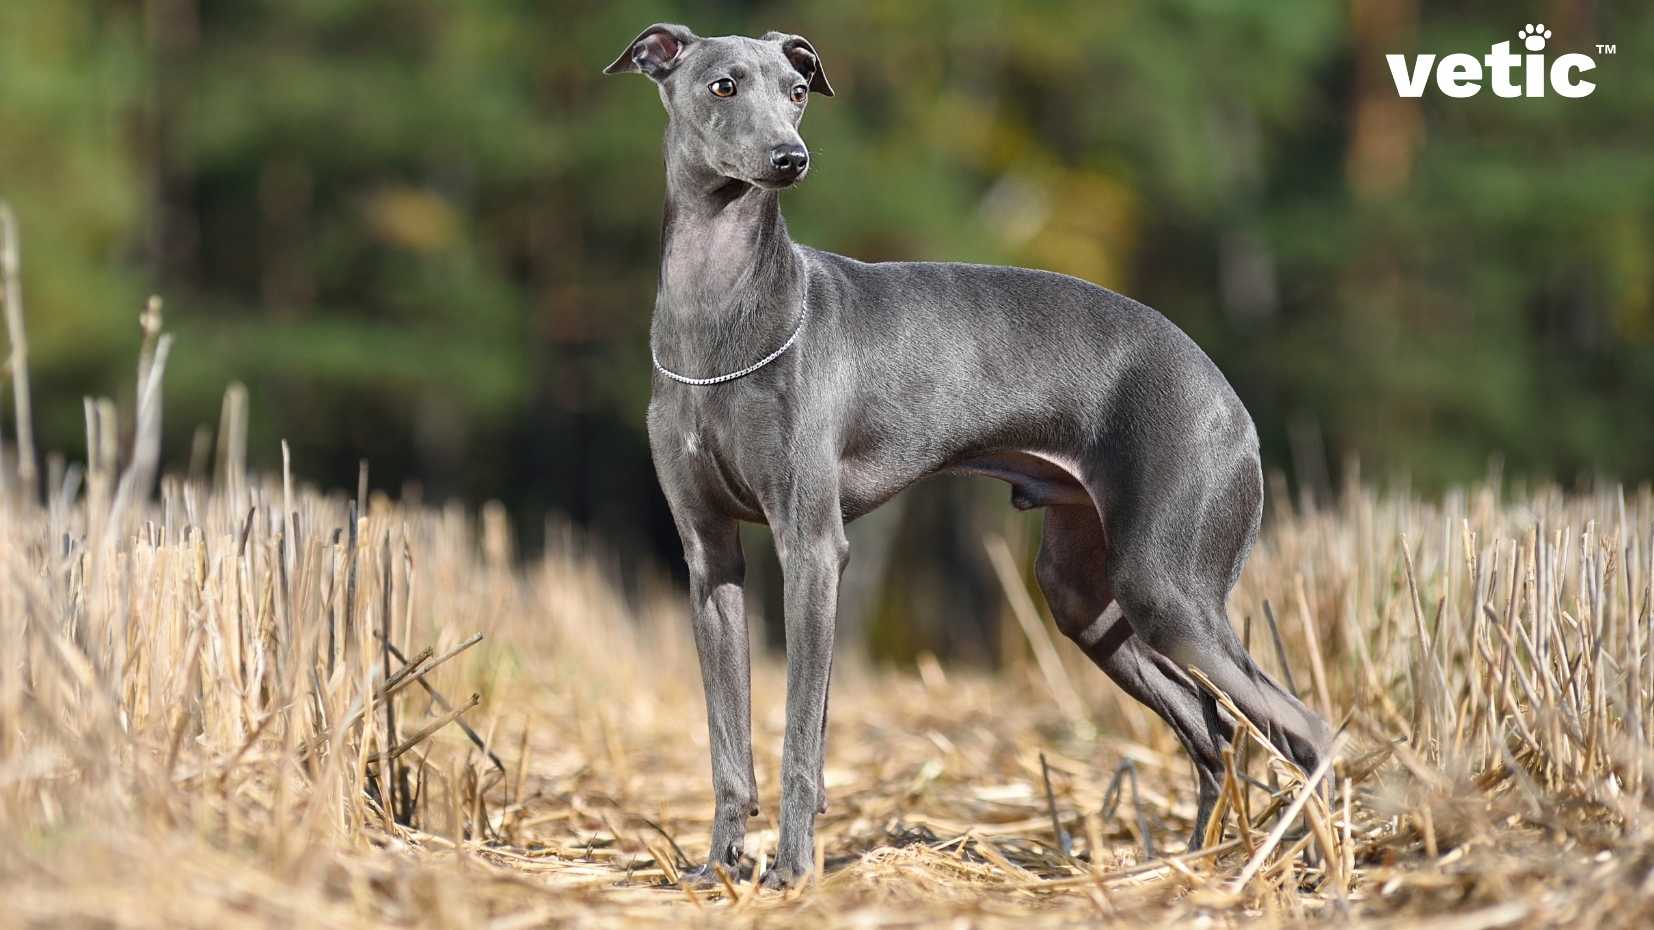 The greyhound and whippet may confuse many thanks to their common body shape, behavioural traits and even coat colours. However, this is a blue-grey greyhound - blue is a shade only recognized in greyhounds and not among whippets according to the AKC breed standards. The greyhound is a male adult standing in a farmland, looking at a distance. he has a silver chain around his neck, and tail tucked between his hind legs